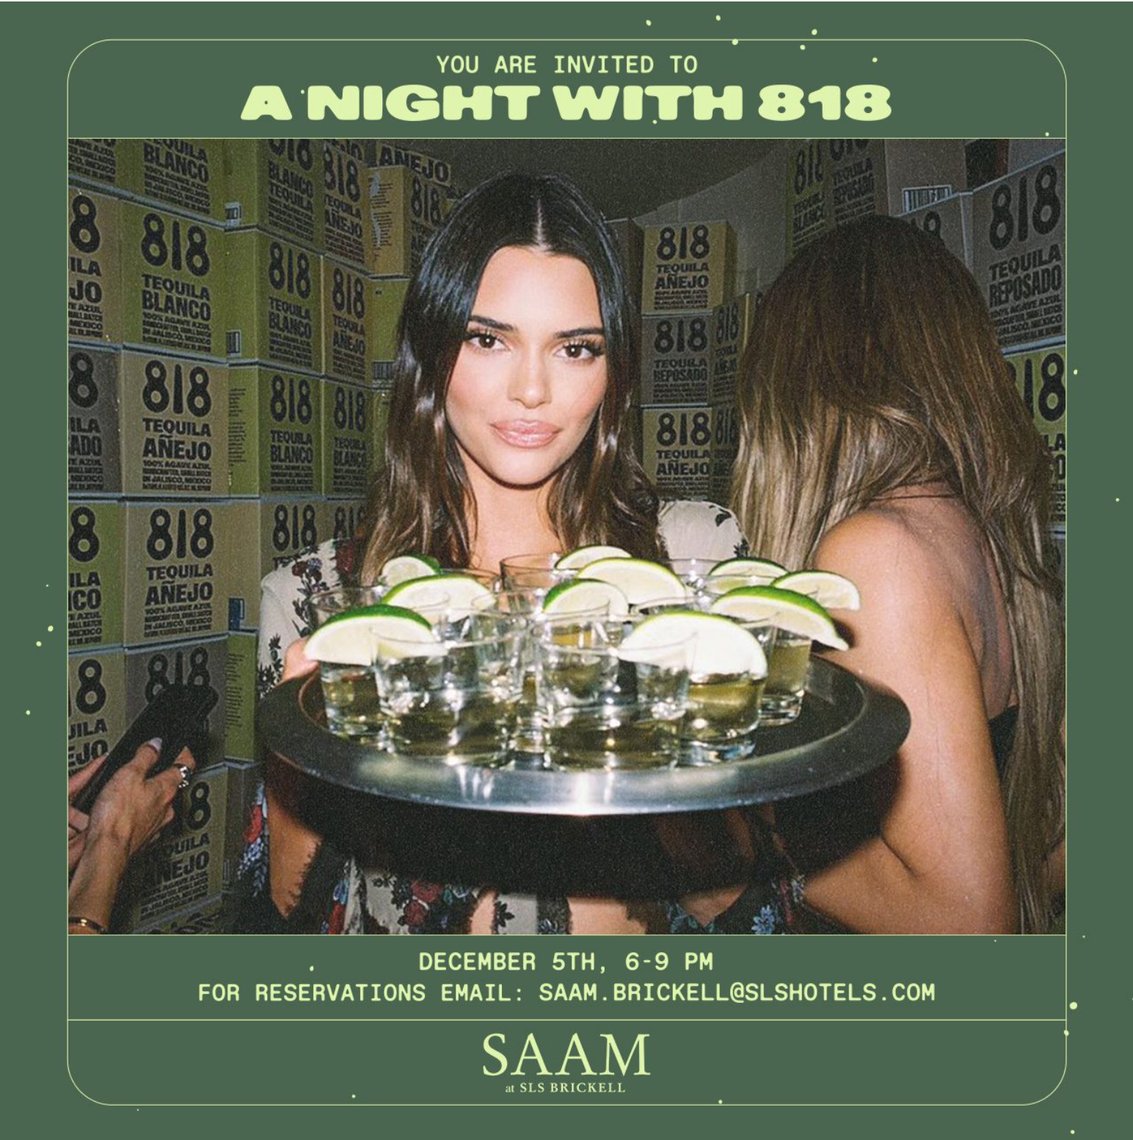 A Night with 818 Tequila (Corporate & SLS Brickell)